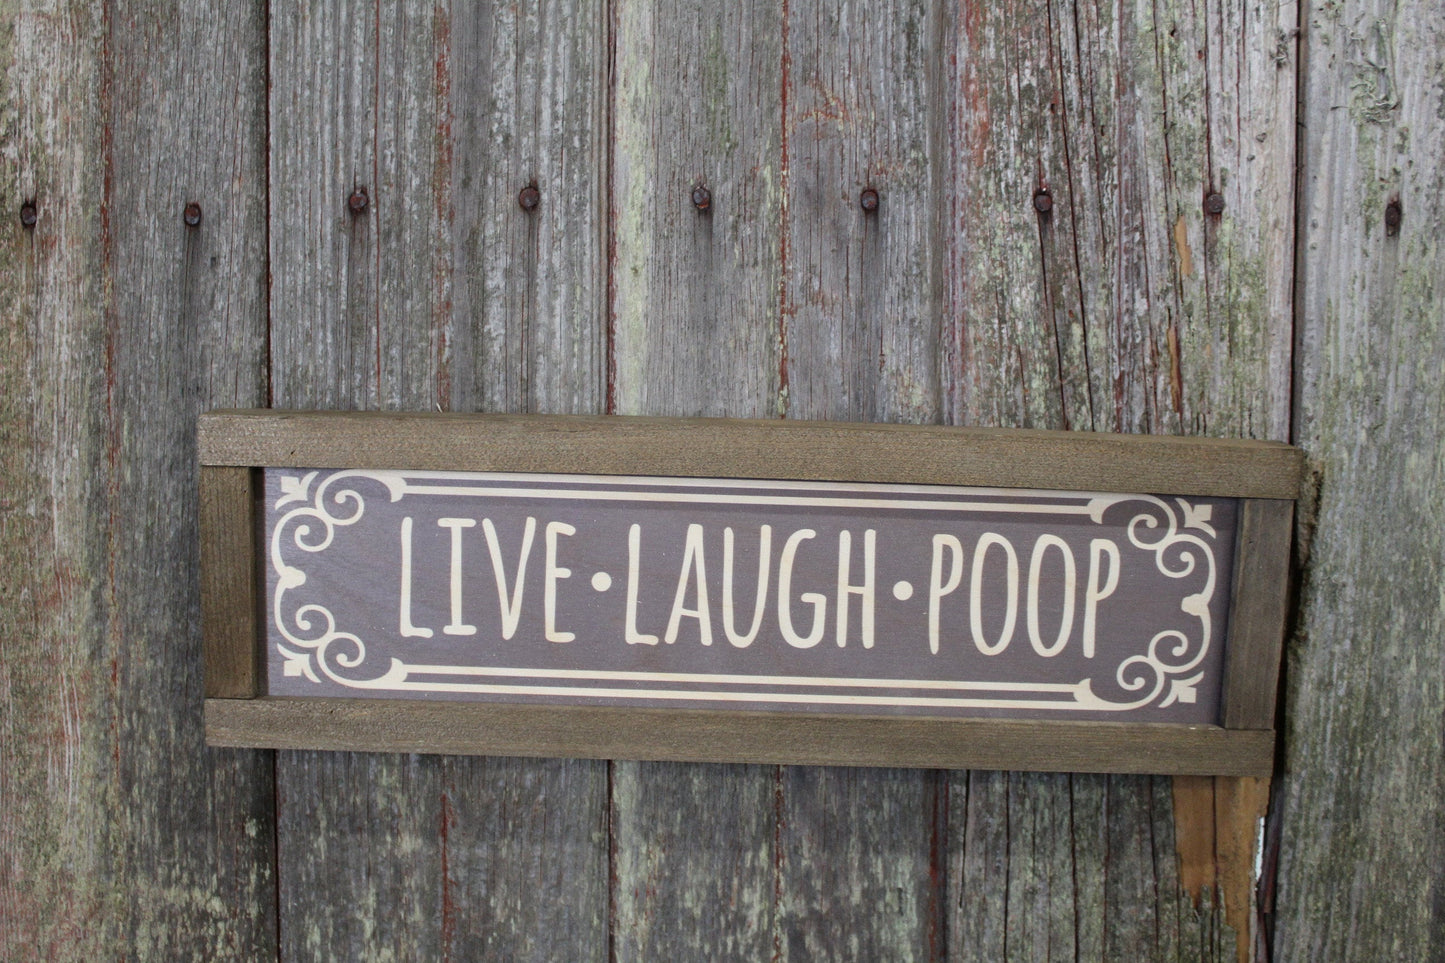 Live Laugh Poop Bathroom Sign Wood Printed Rustic Primitive Wall Art Picture Text Script Retro Bath Funny Silly Small Gray Brown Print